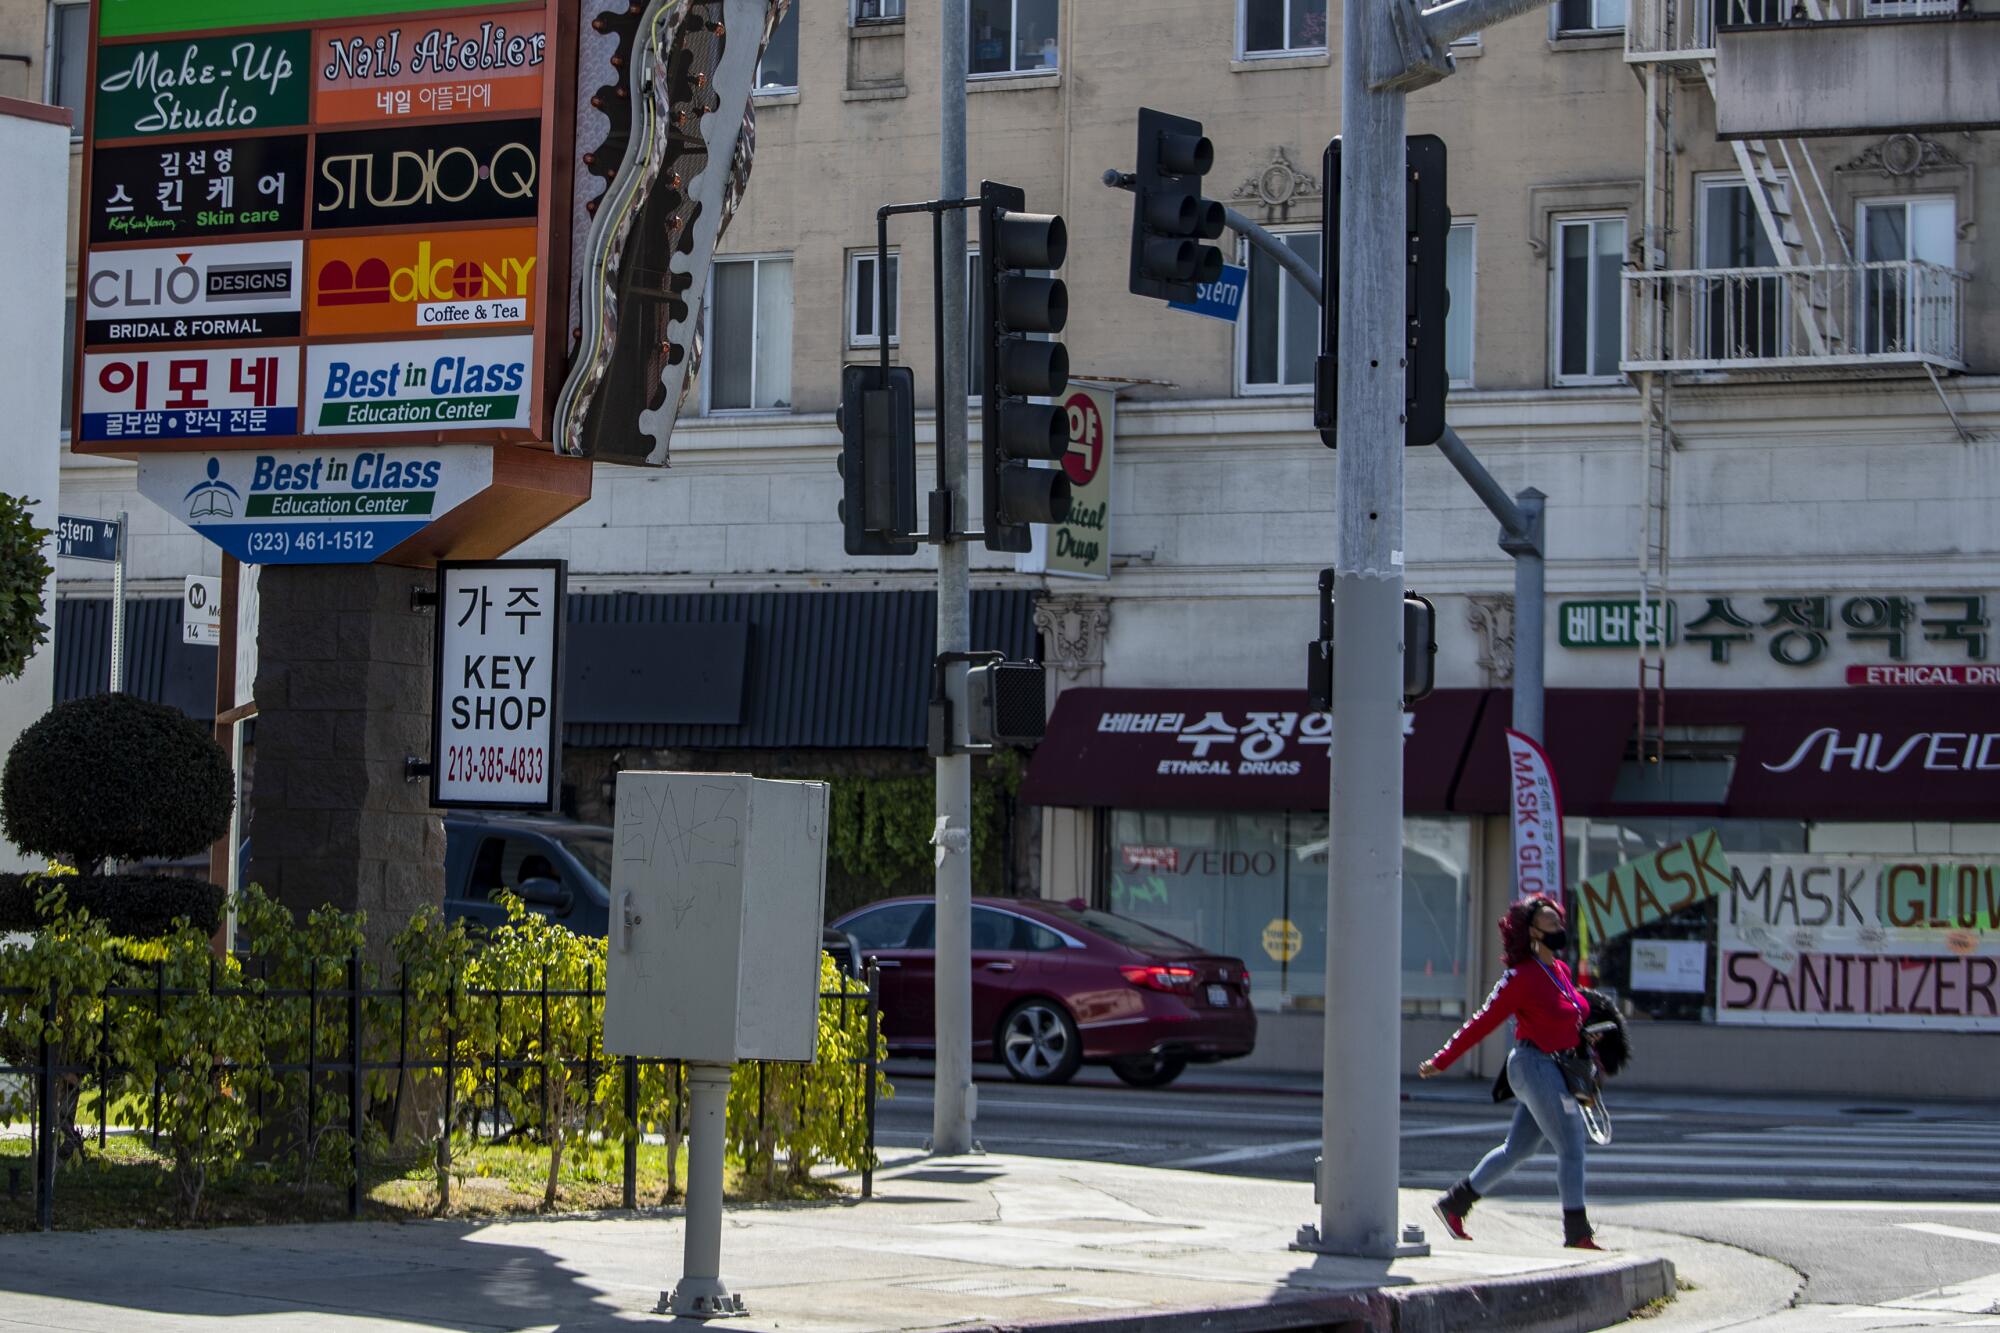 A street block in Koreatown with store fronts and signs